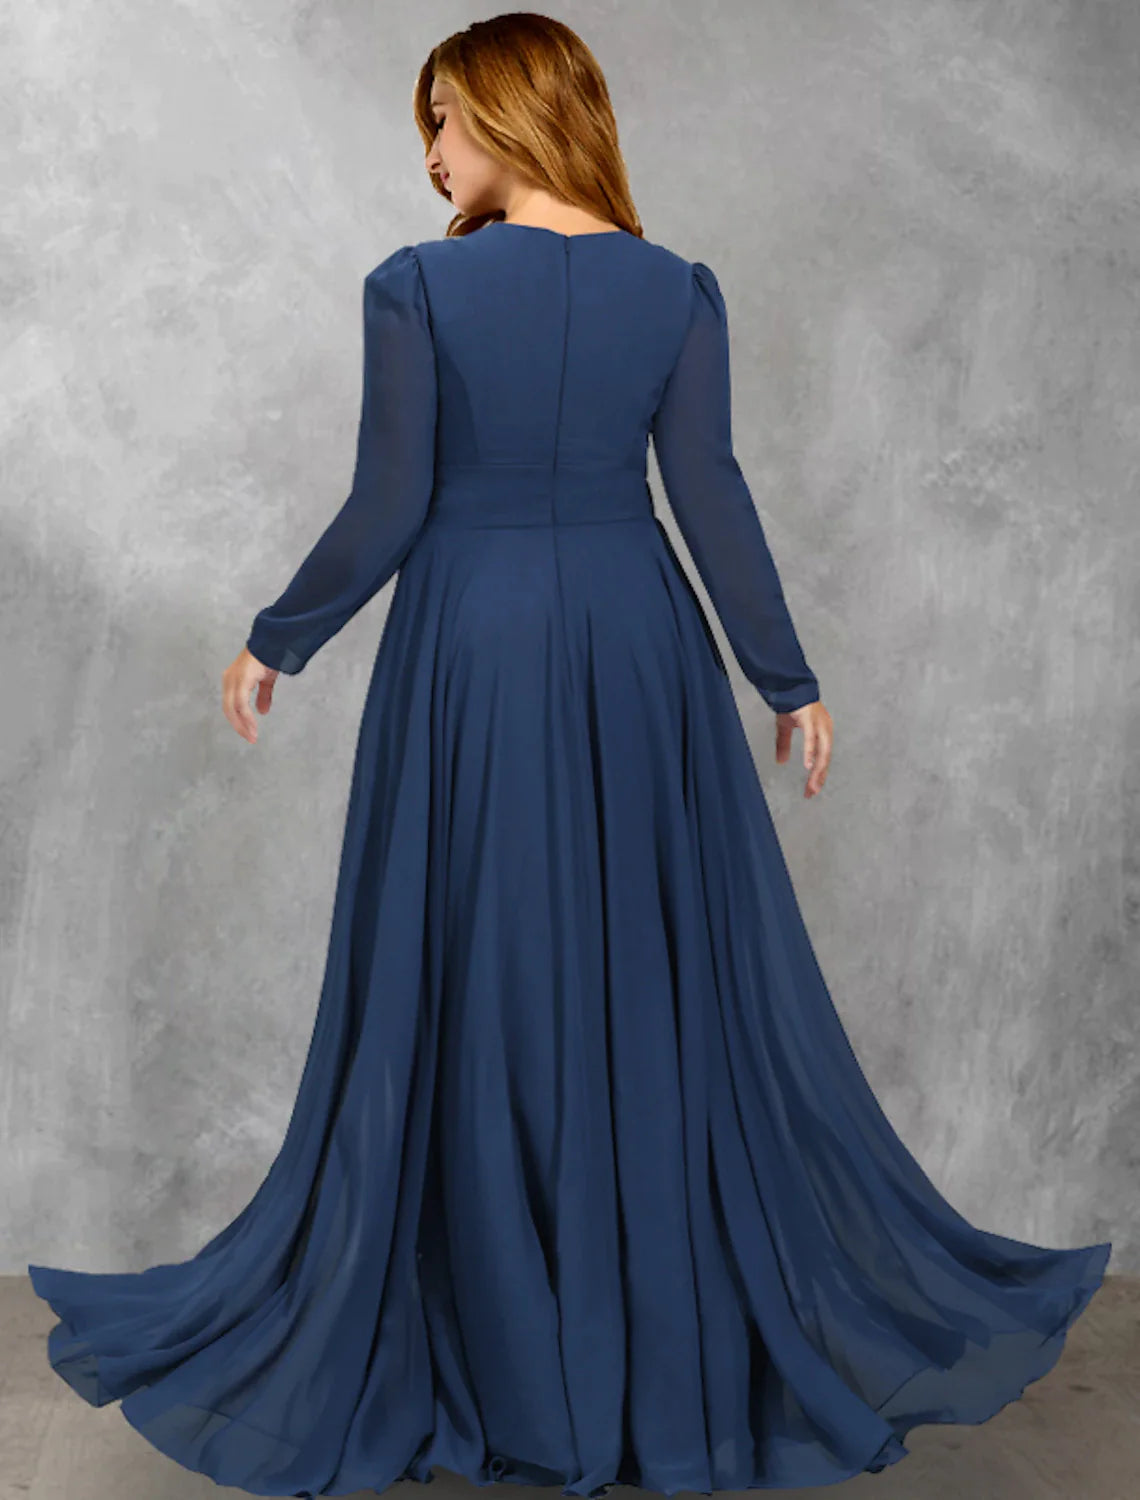 A-Line Plus Size Curve Mother of the Bride Dresses Vintage Dress Formal Floor Length Long Sleeve V Neck Chiffon with Pleats Ruffles